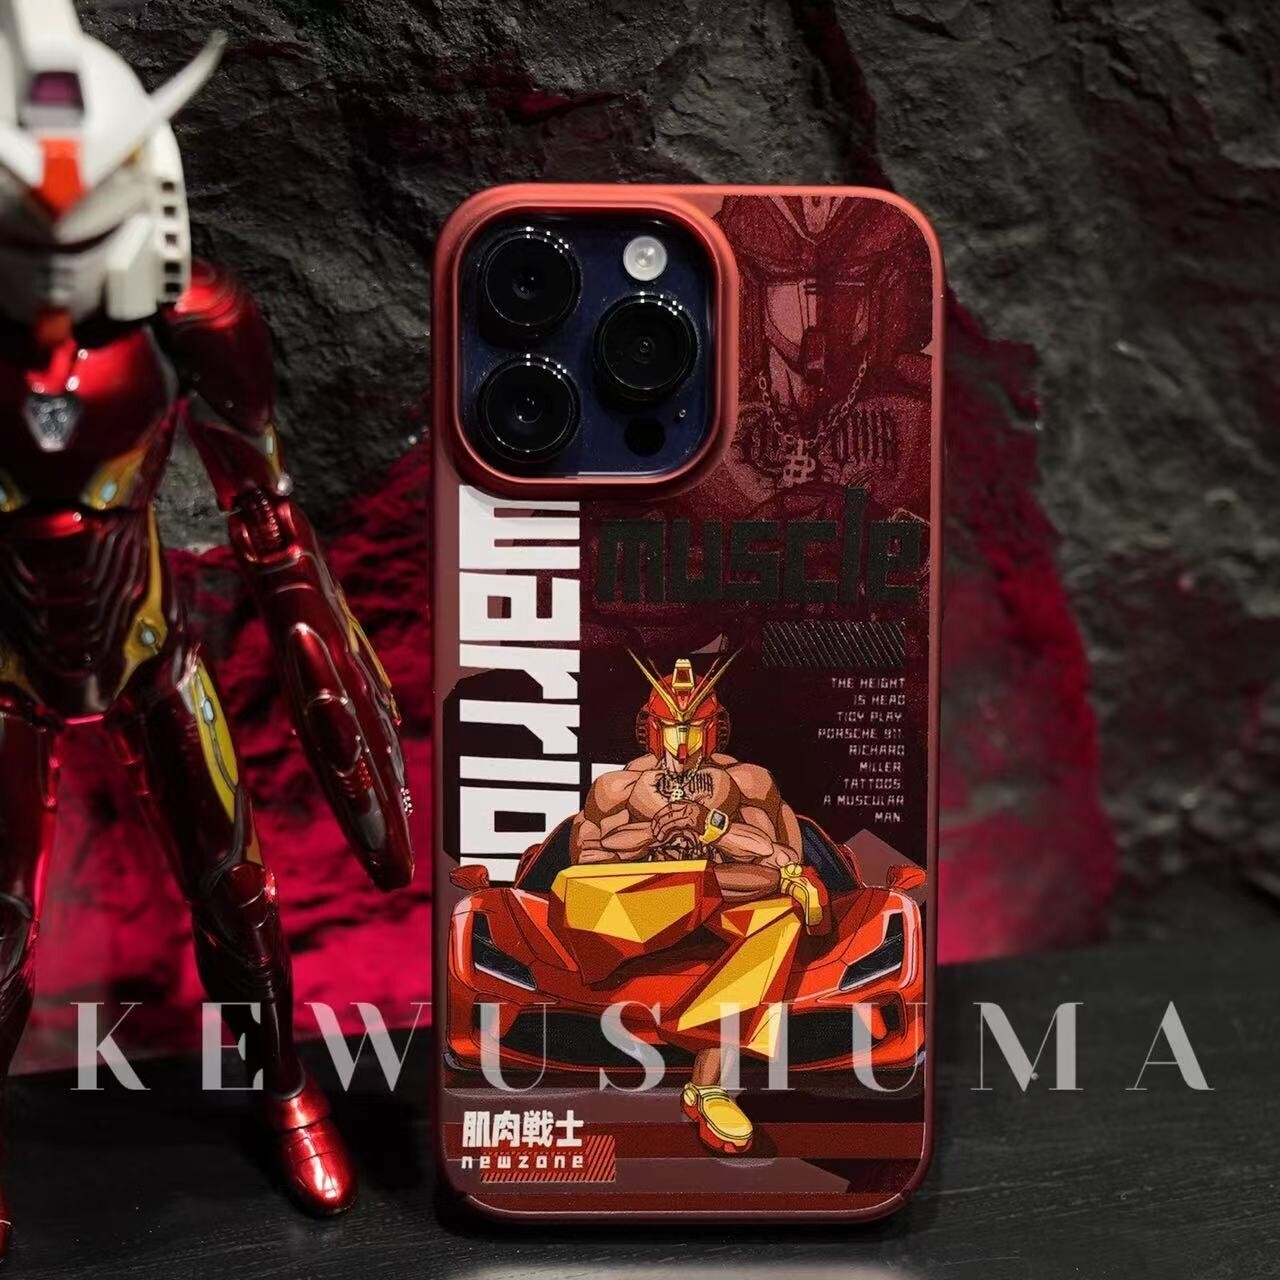 Amazing 2023 Muscular Fighters with Super Fierce Mechs iPhone Case, Model: iPhone 14 Pro Max, Color: Kw skin-feeling hard shell [muscle warrior] red